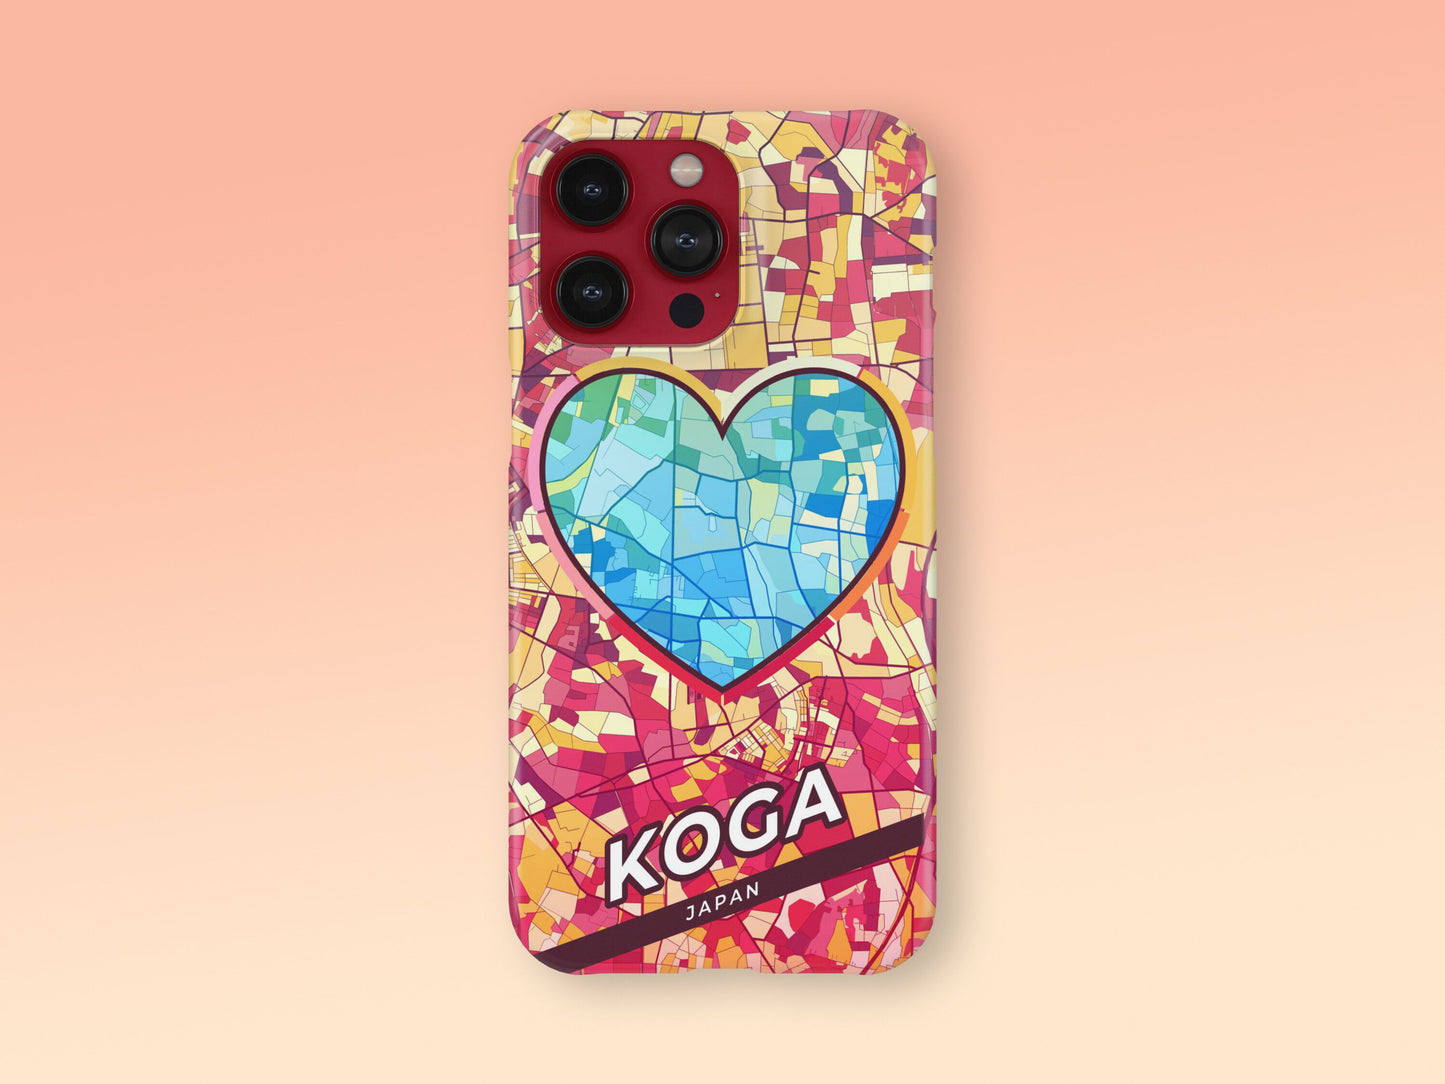 Koga Japan slim phone case with colorful icon. Birthday, wedding or housewarming gift. Couple match cases. 2